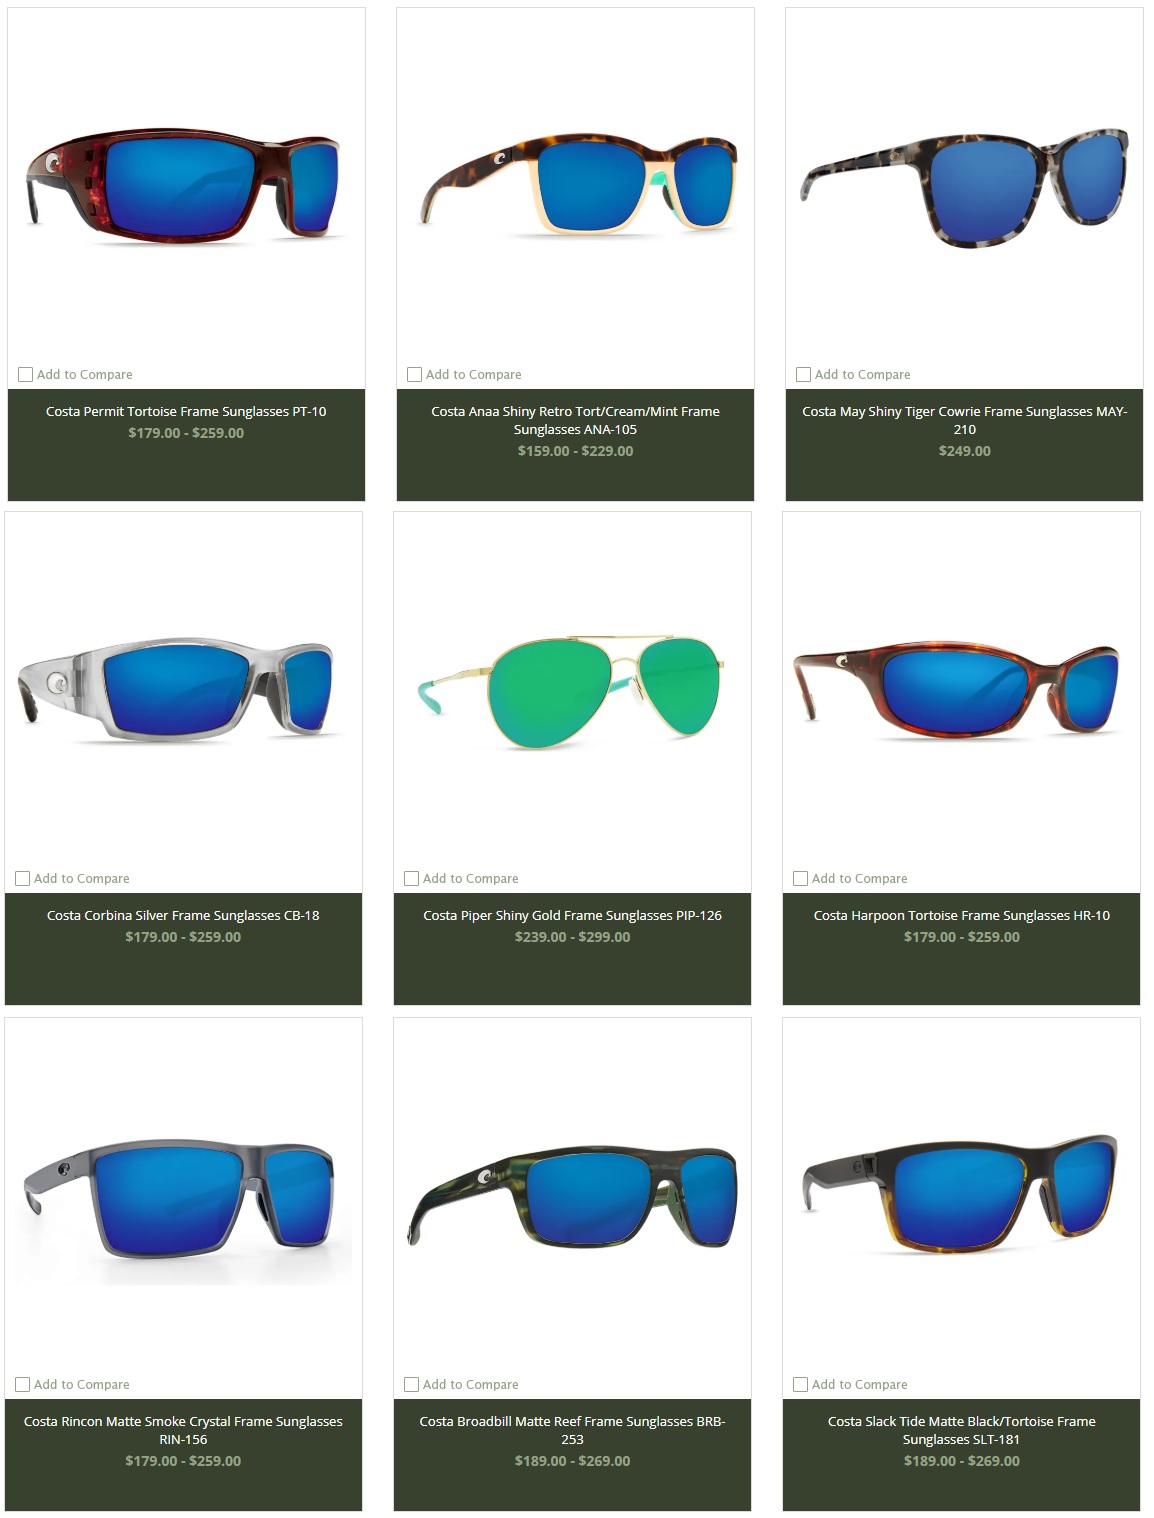 Costa Del Mar Polarized Sunglassess with Free Shipping coupon SHADE